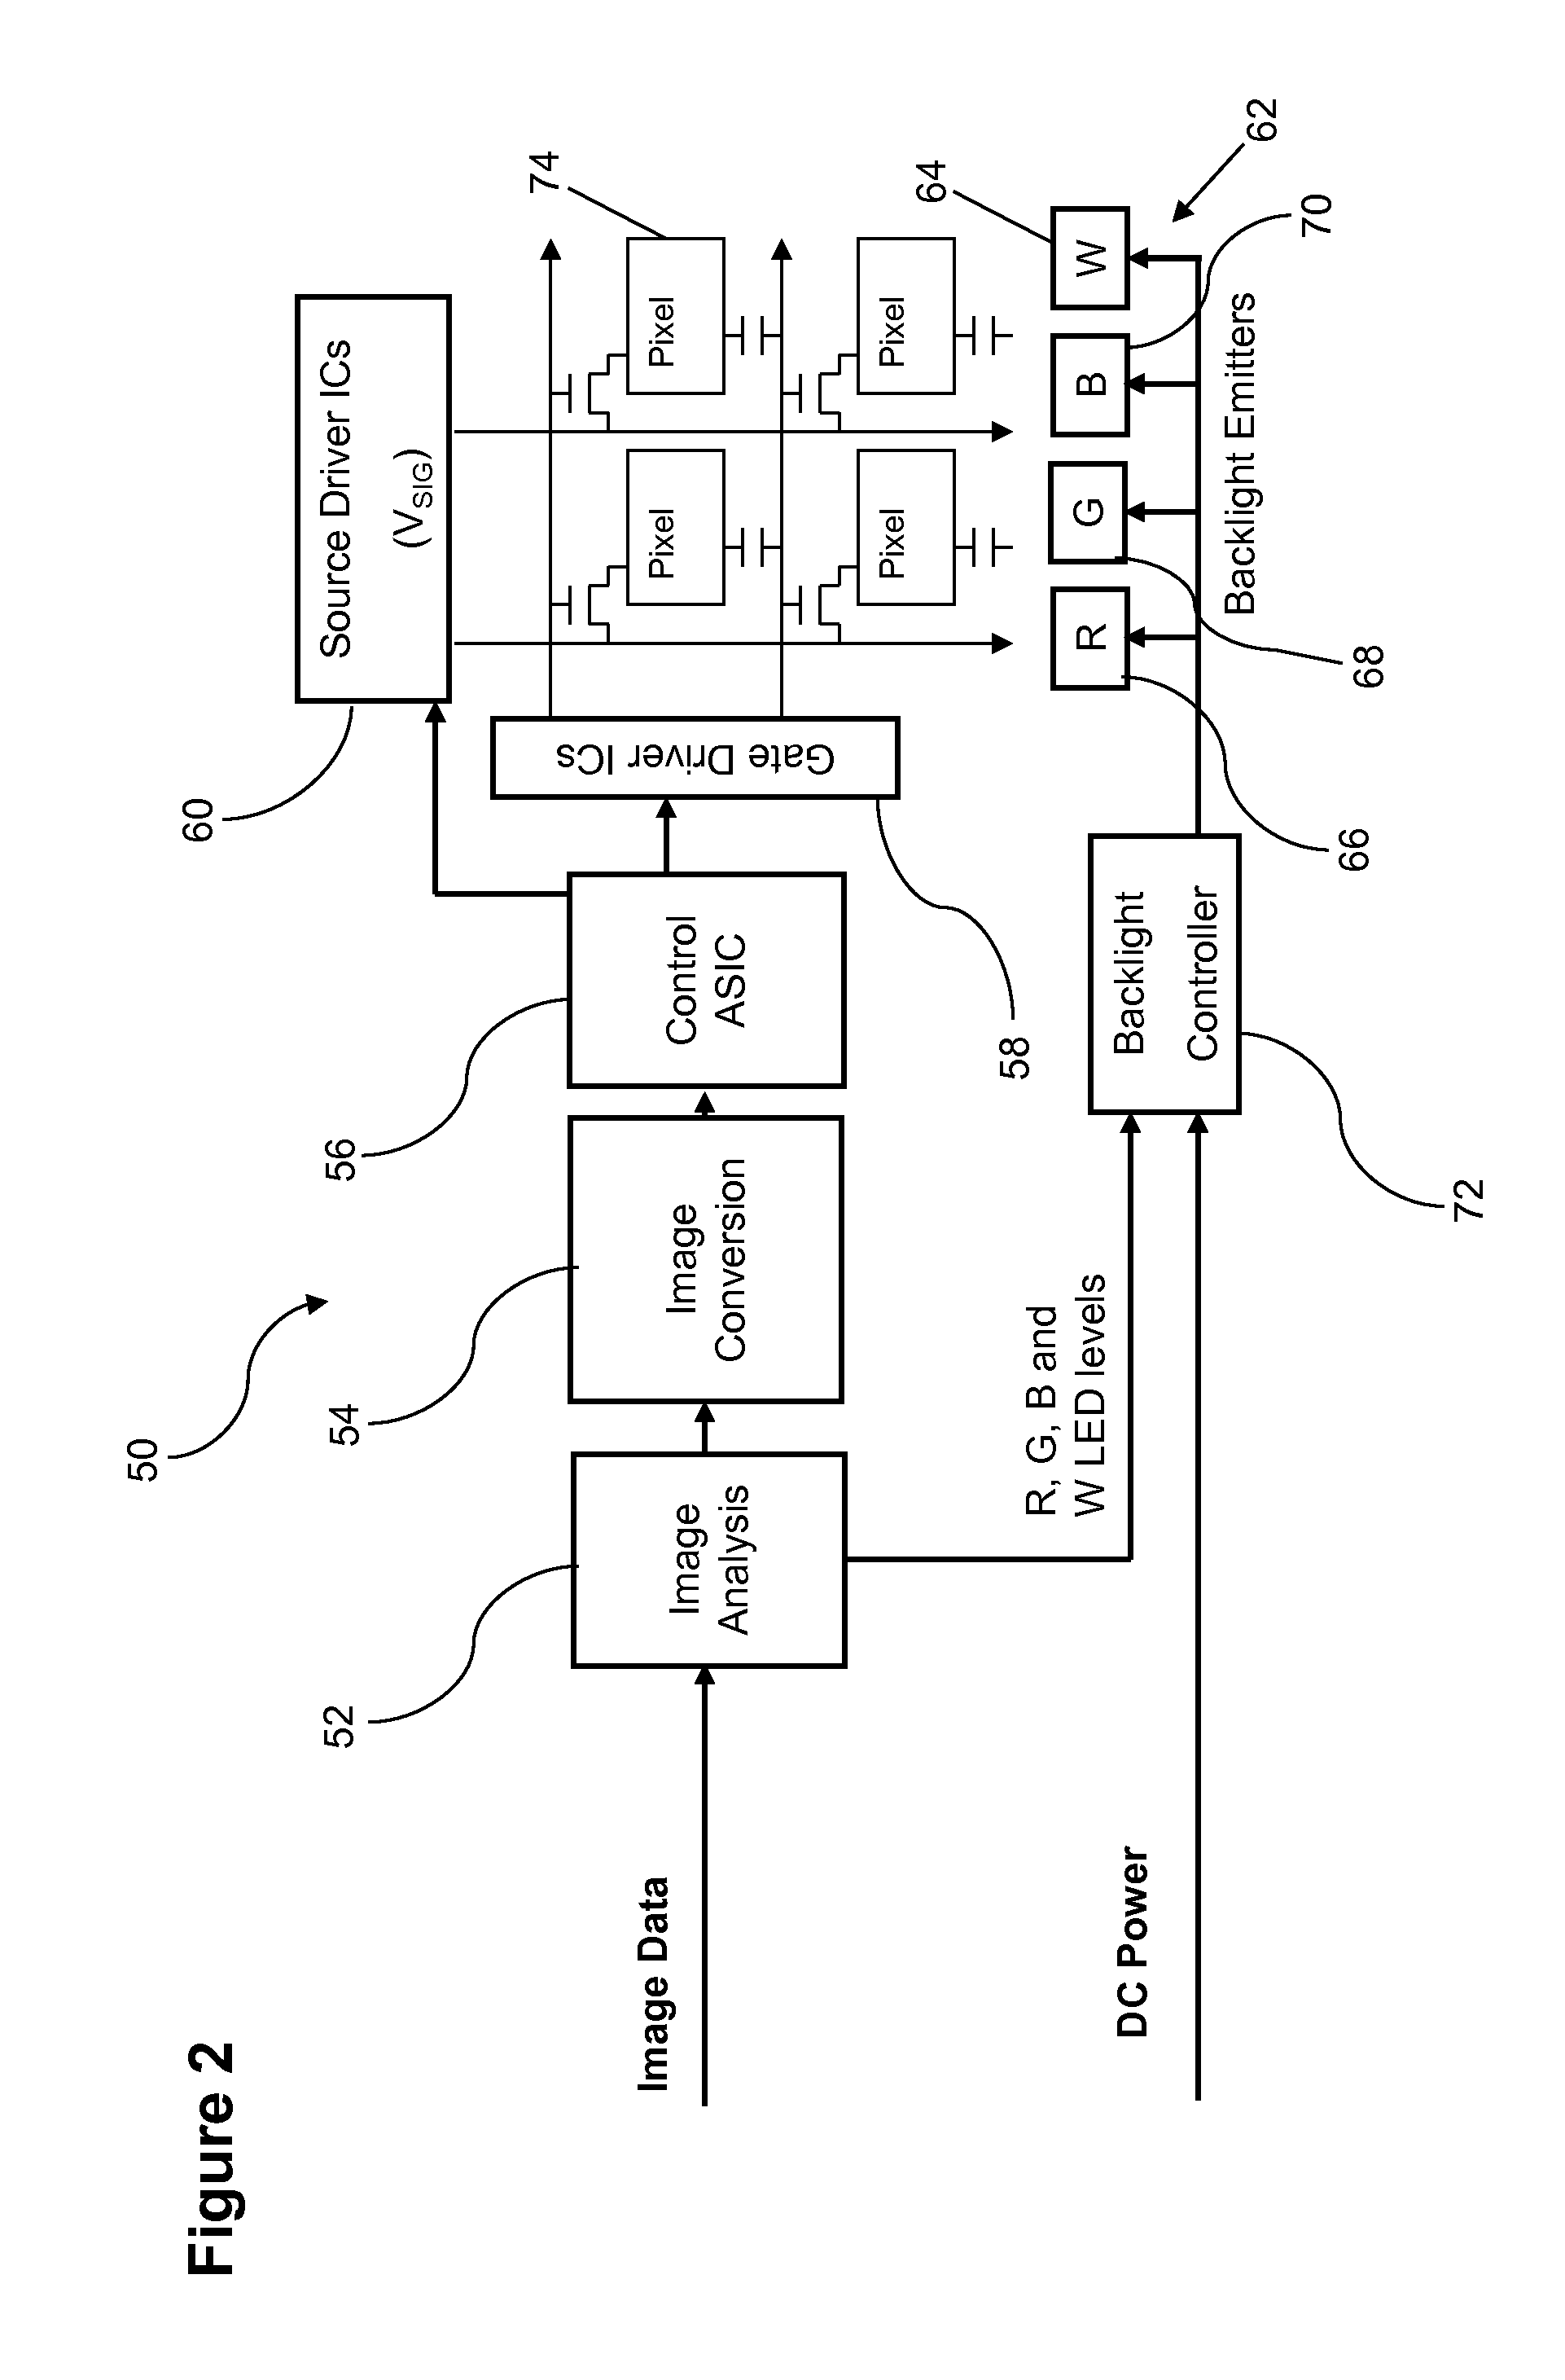 Display device with a backlight